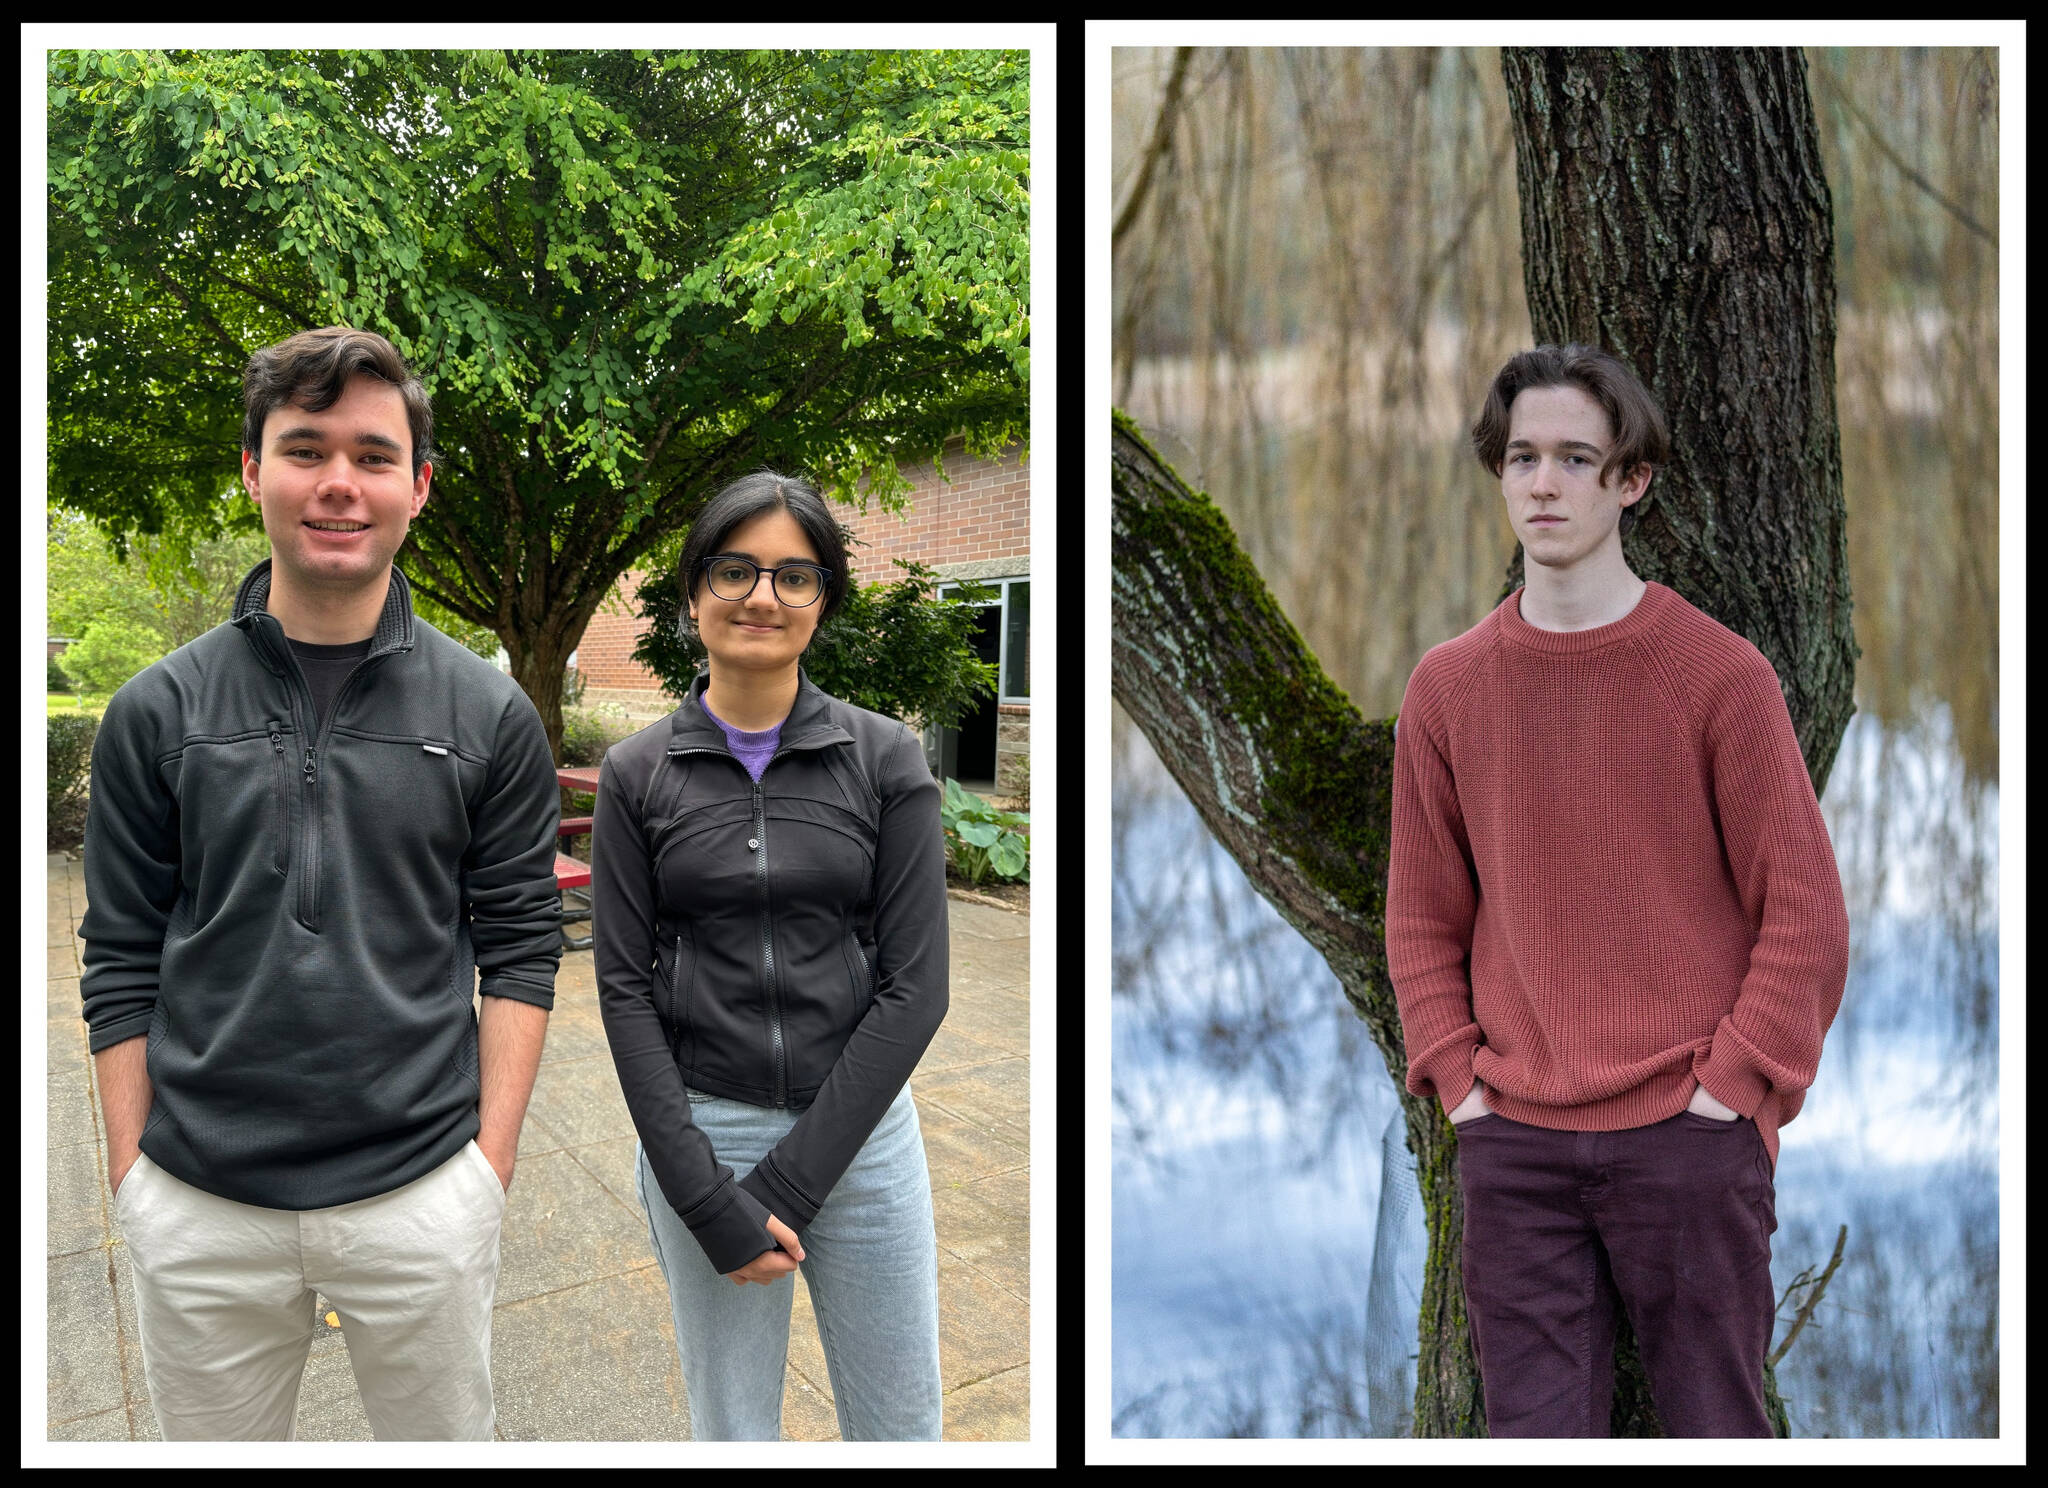 From left to right, Mercer Island’s Davin Aoyama, Subhadra Vadlamannati and Andrei Espelien. Andy Nystrom/ staff photo (left) and courtesy photo